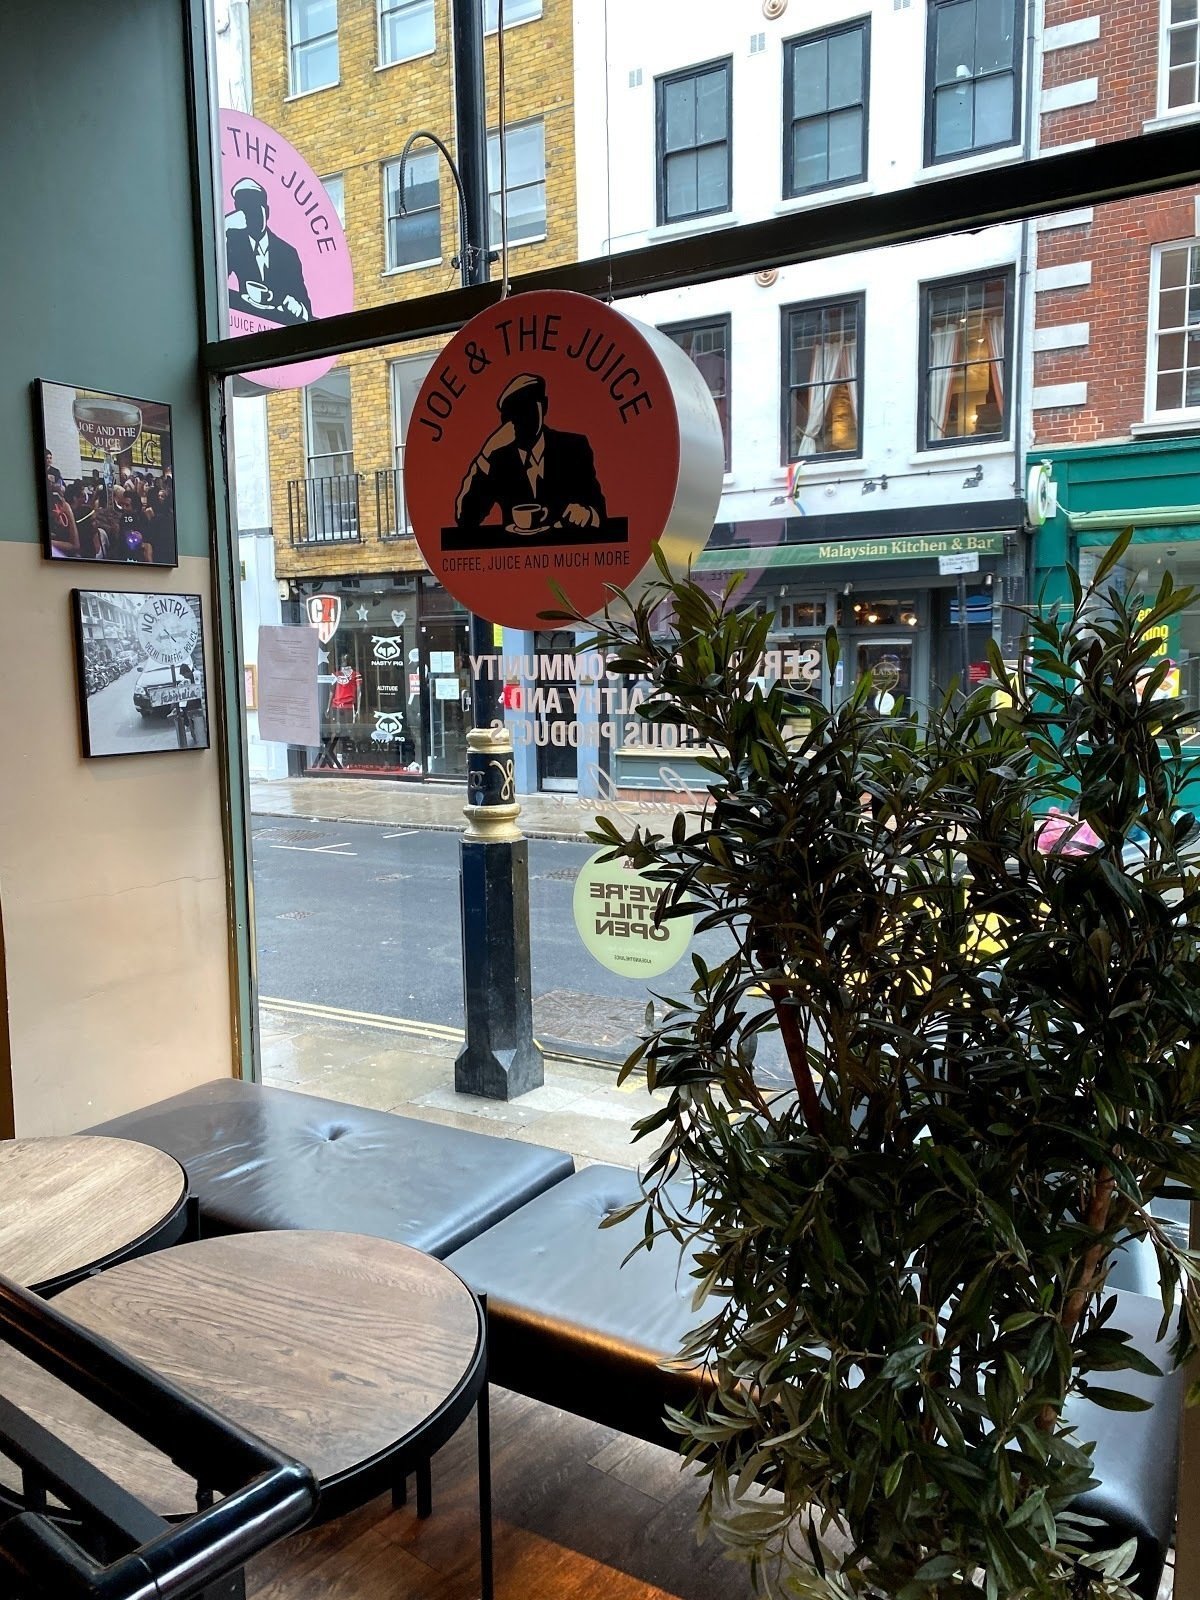 <span class="translation_missing" title="translation missing: en.meta.location_title, location_name: JOE &amp; THE JUICE @ Dean Street, city: London">Location Title</span>